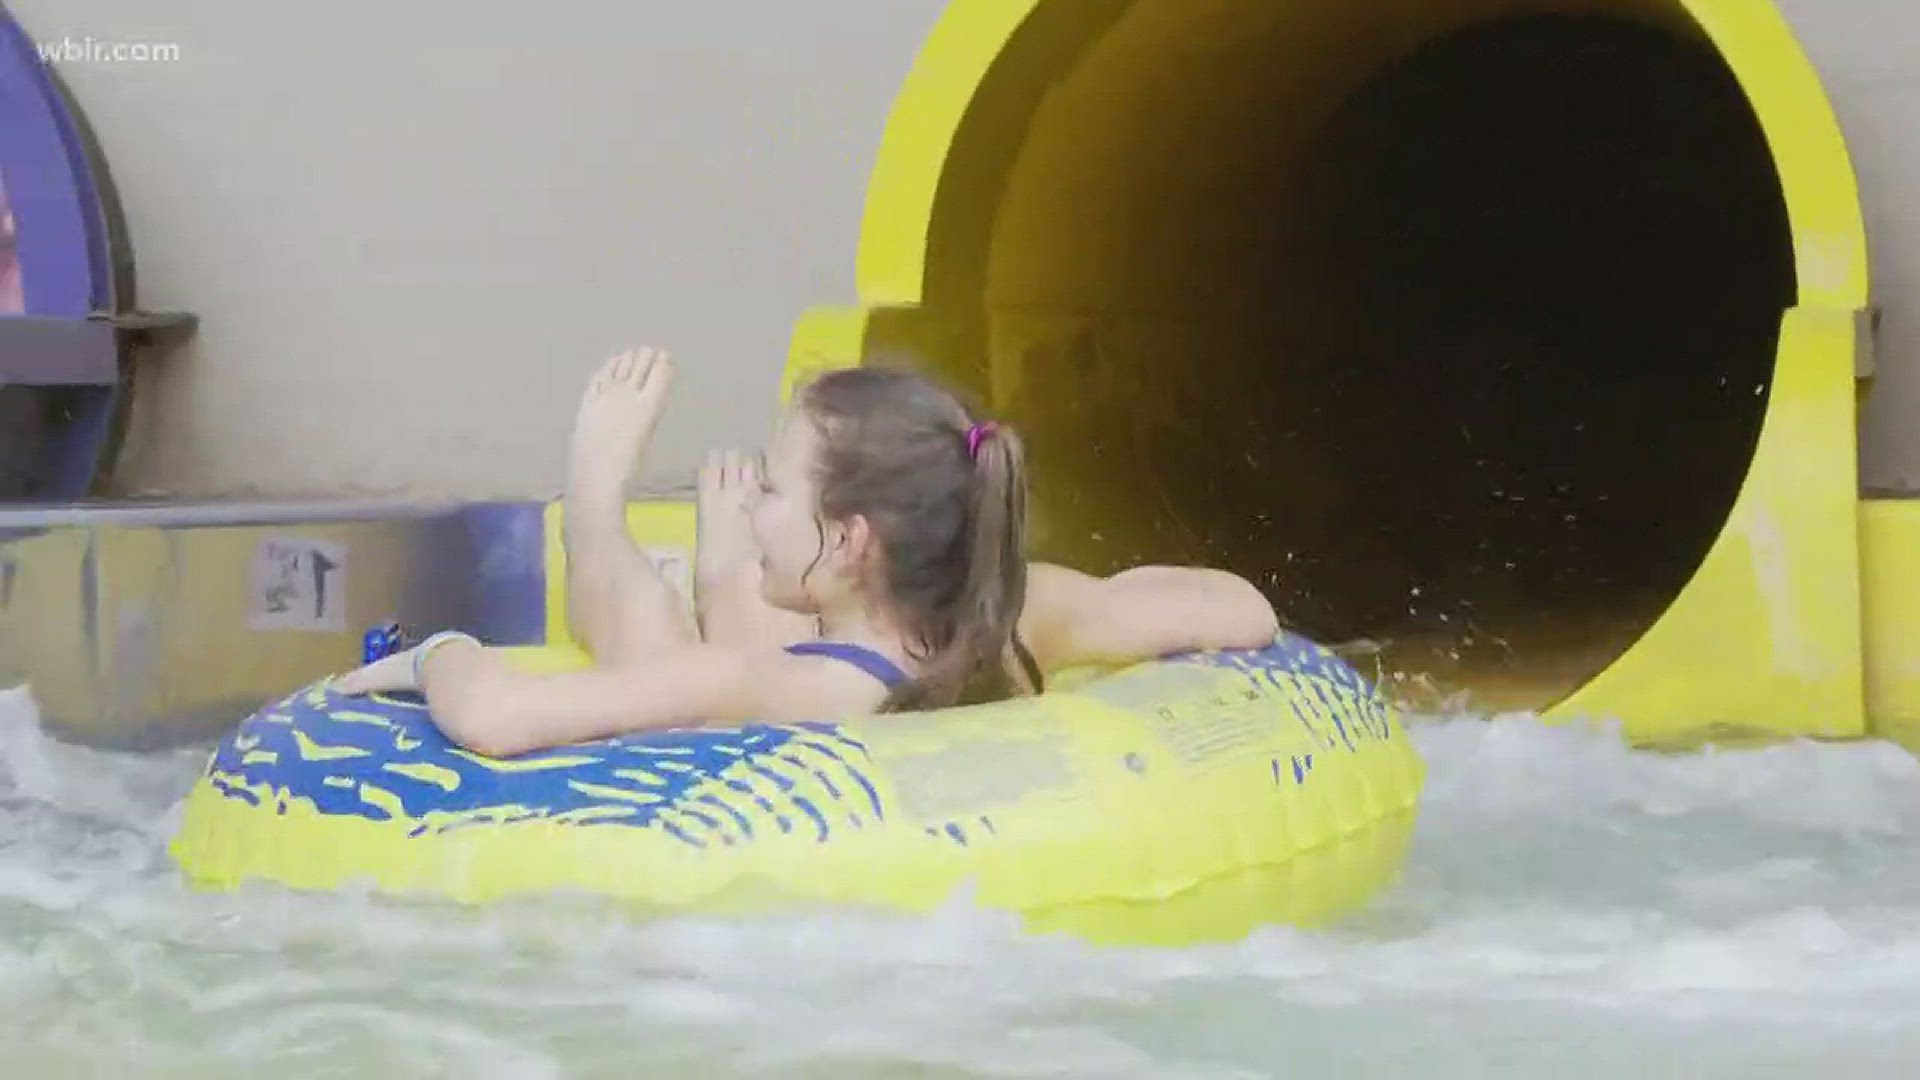 Wilderness of the Smokies' indoor water park opens for $10 to the public when local schools are canceled.